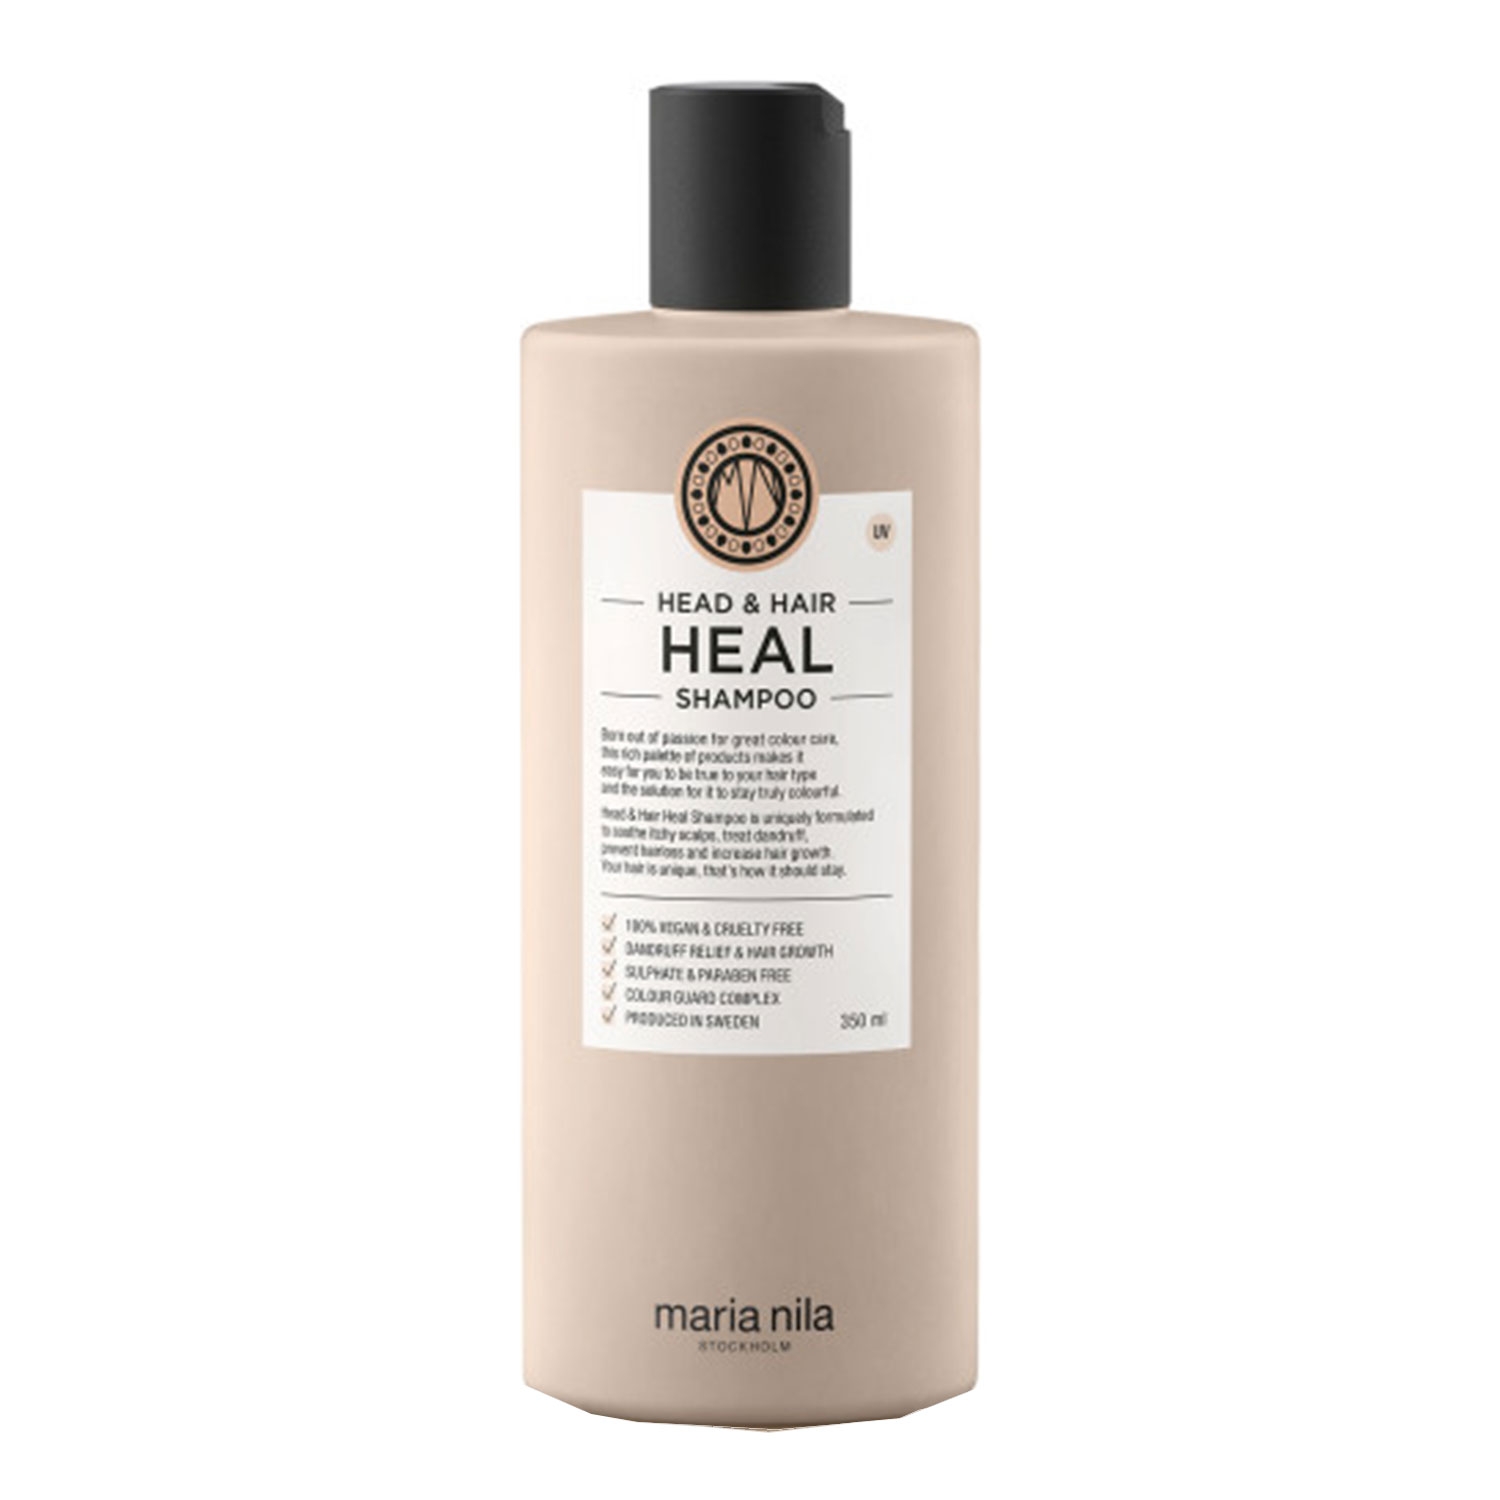 Product image from Care & Style - Head & Hair Heal Shampoo